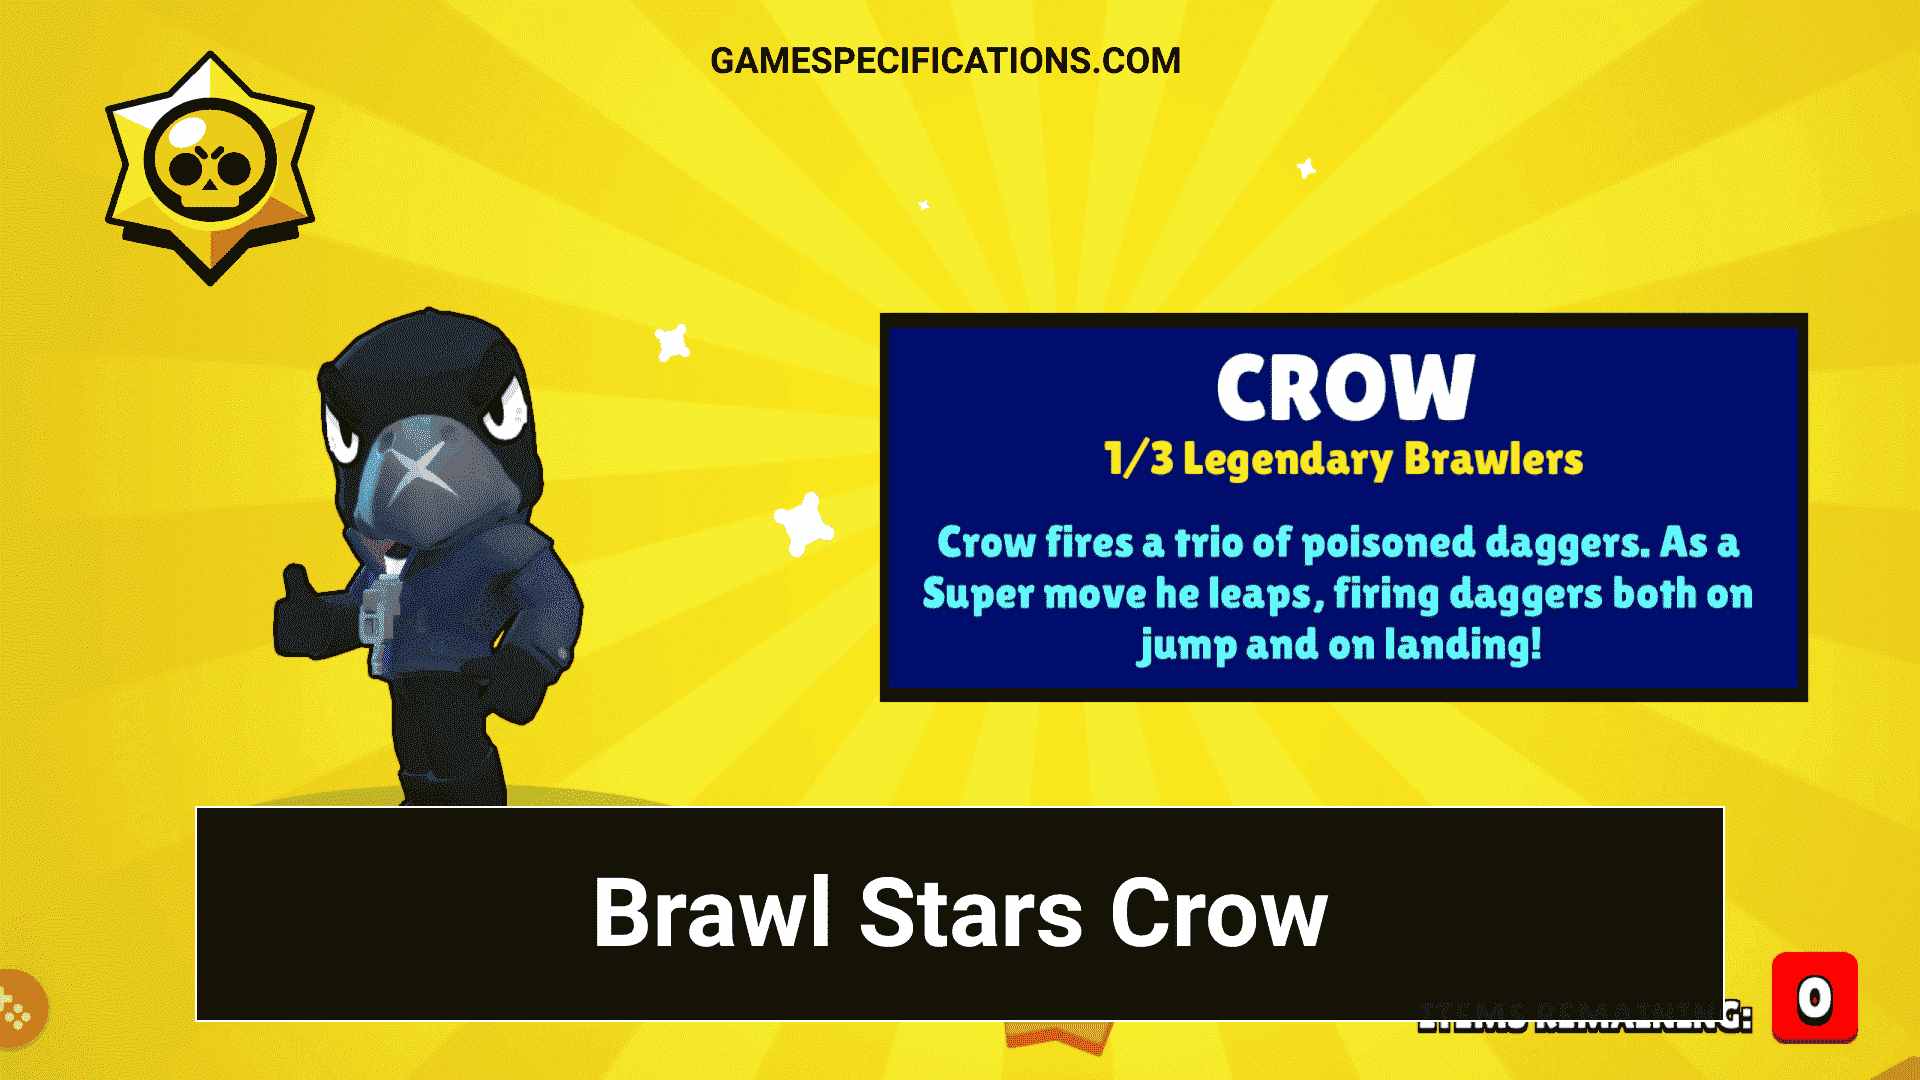 Brawl Stars Crow – The Legendary Character You Must Know